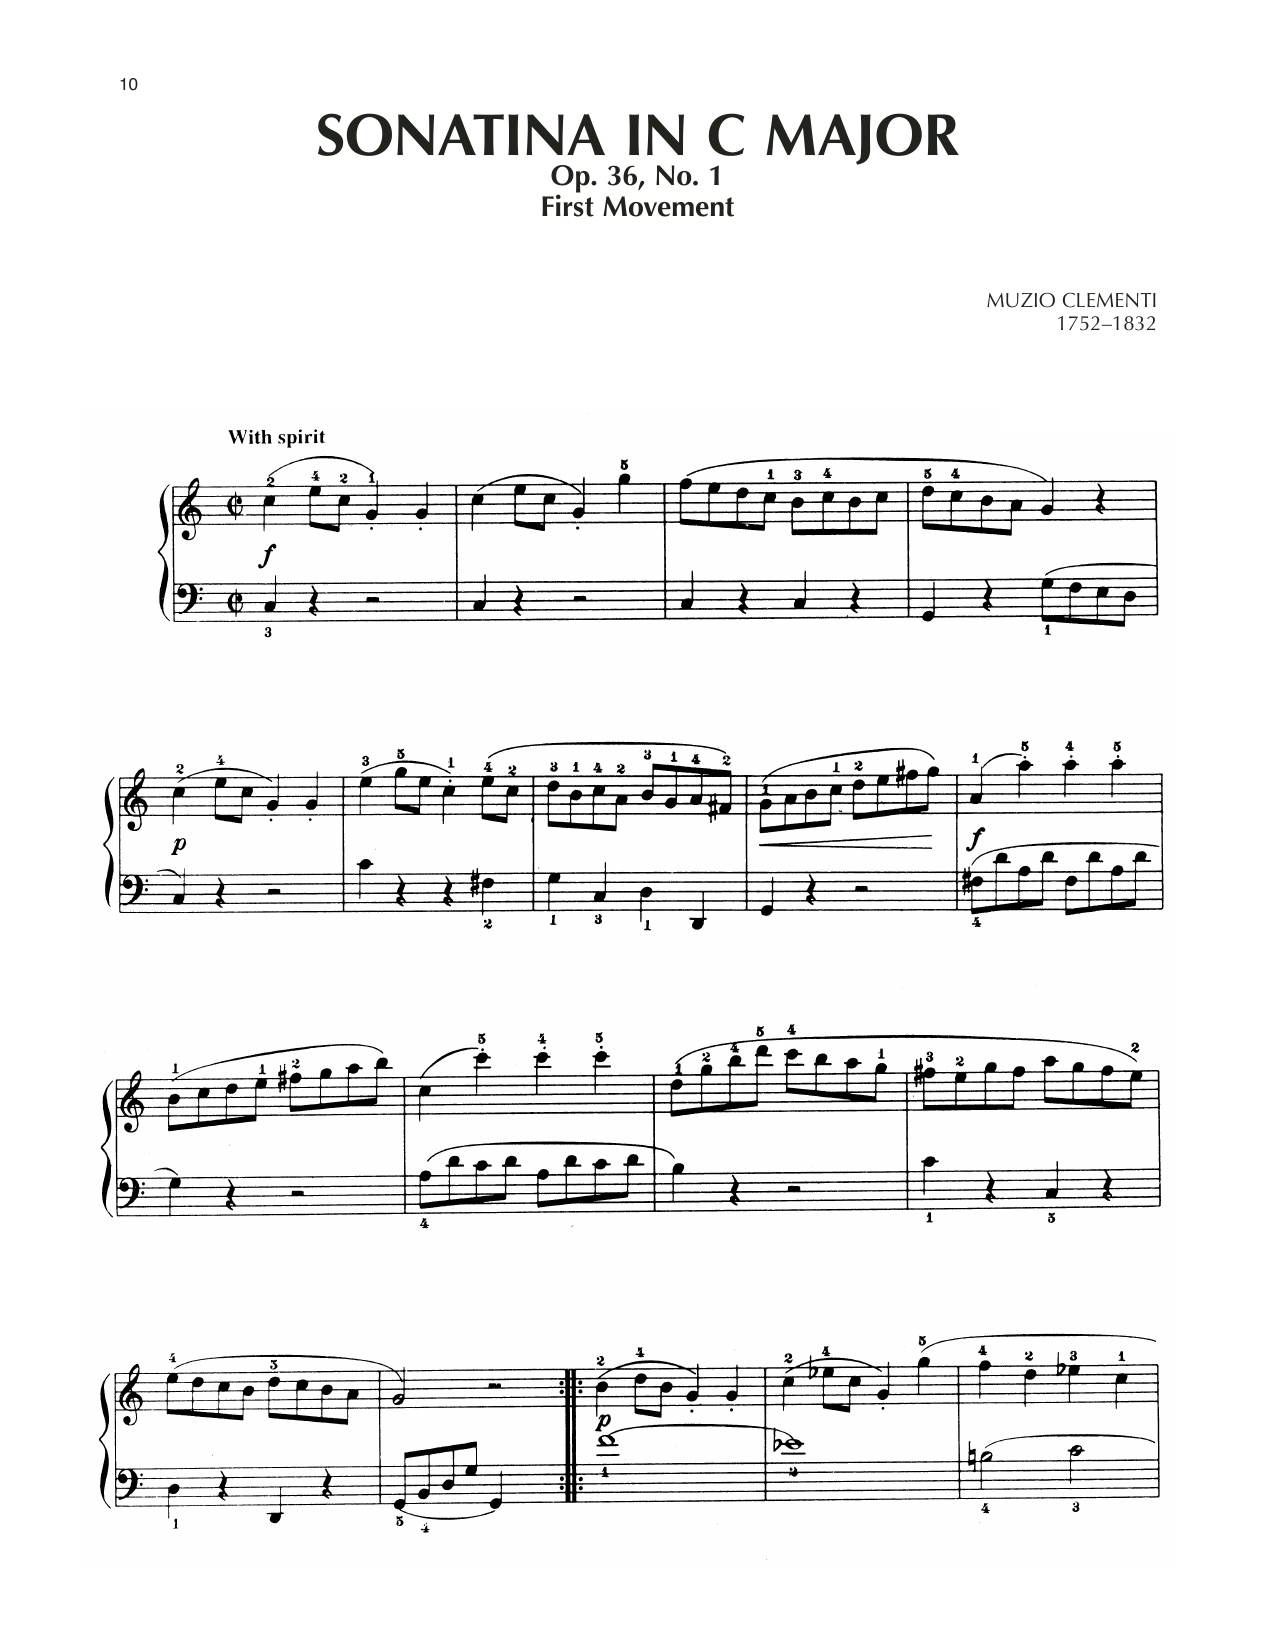 traitor Sheet Music - 36 Arrangements Available Instantly - Musicnotes